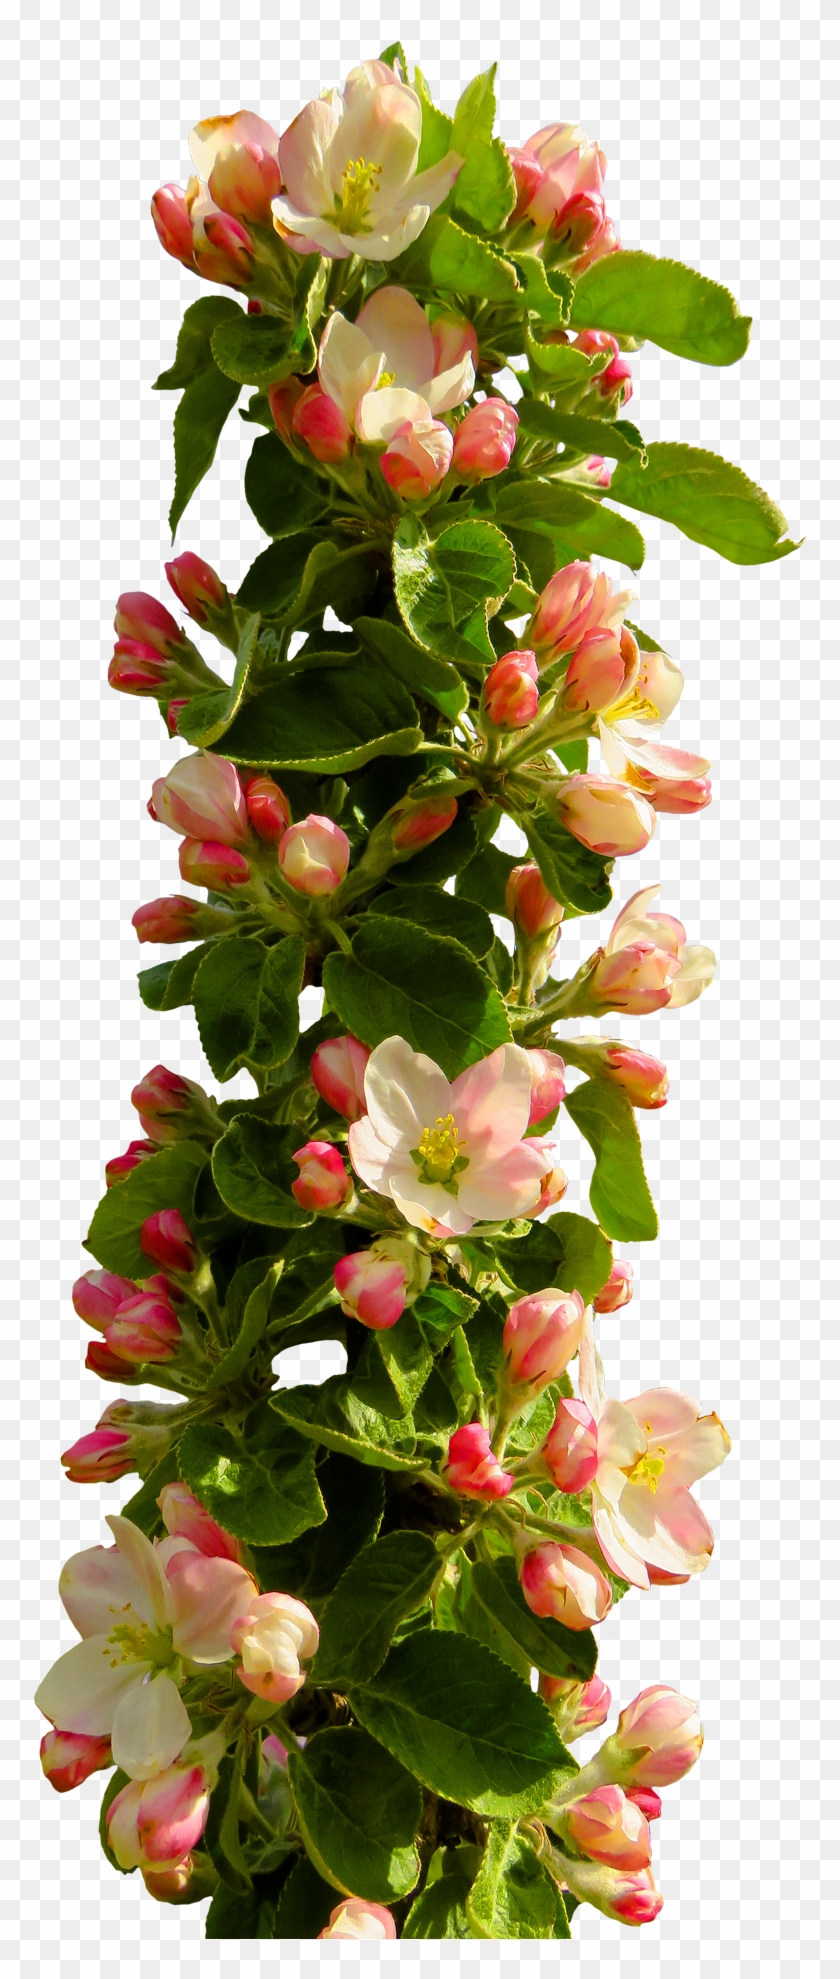 Best Spring Flower Png Transparent Image With Png Flower - Best Spring Flower Png Transparent Image With Png Flower #285944